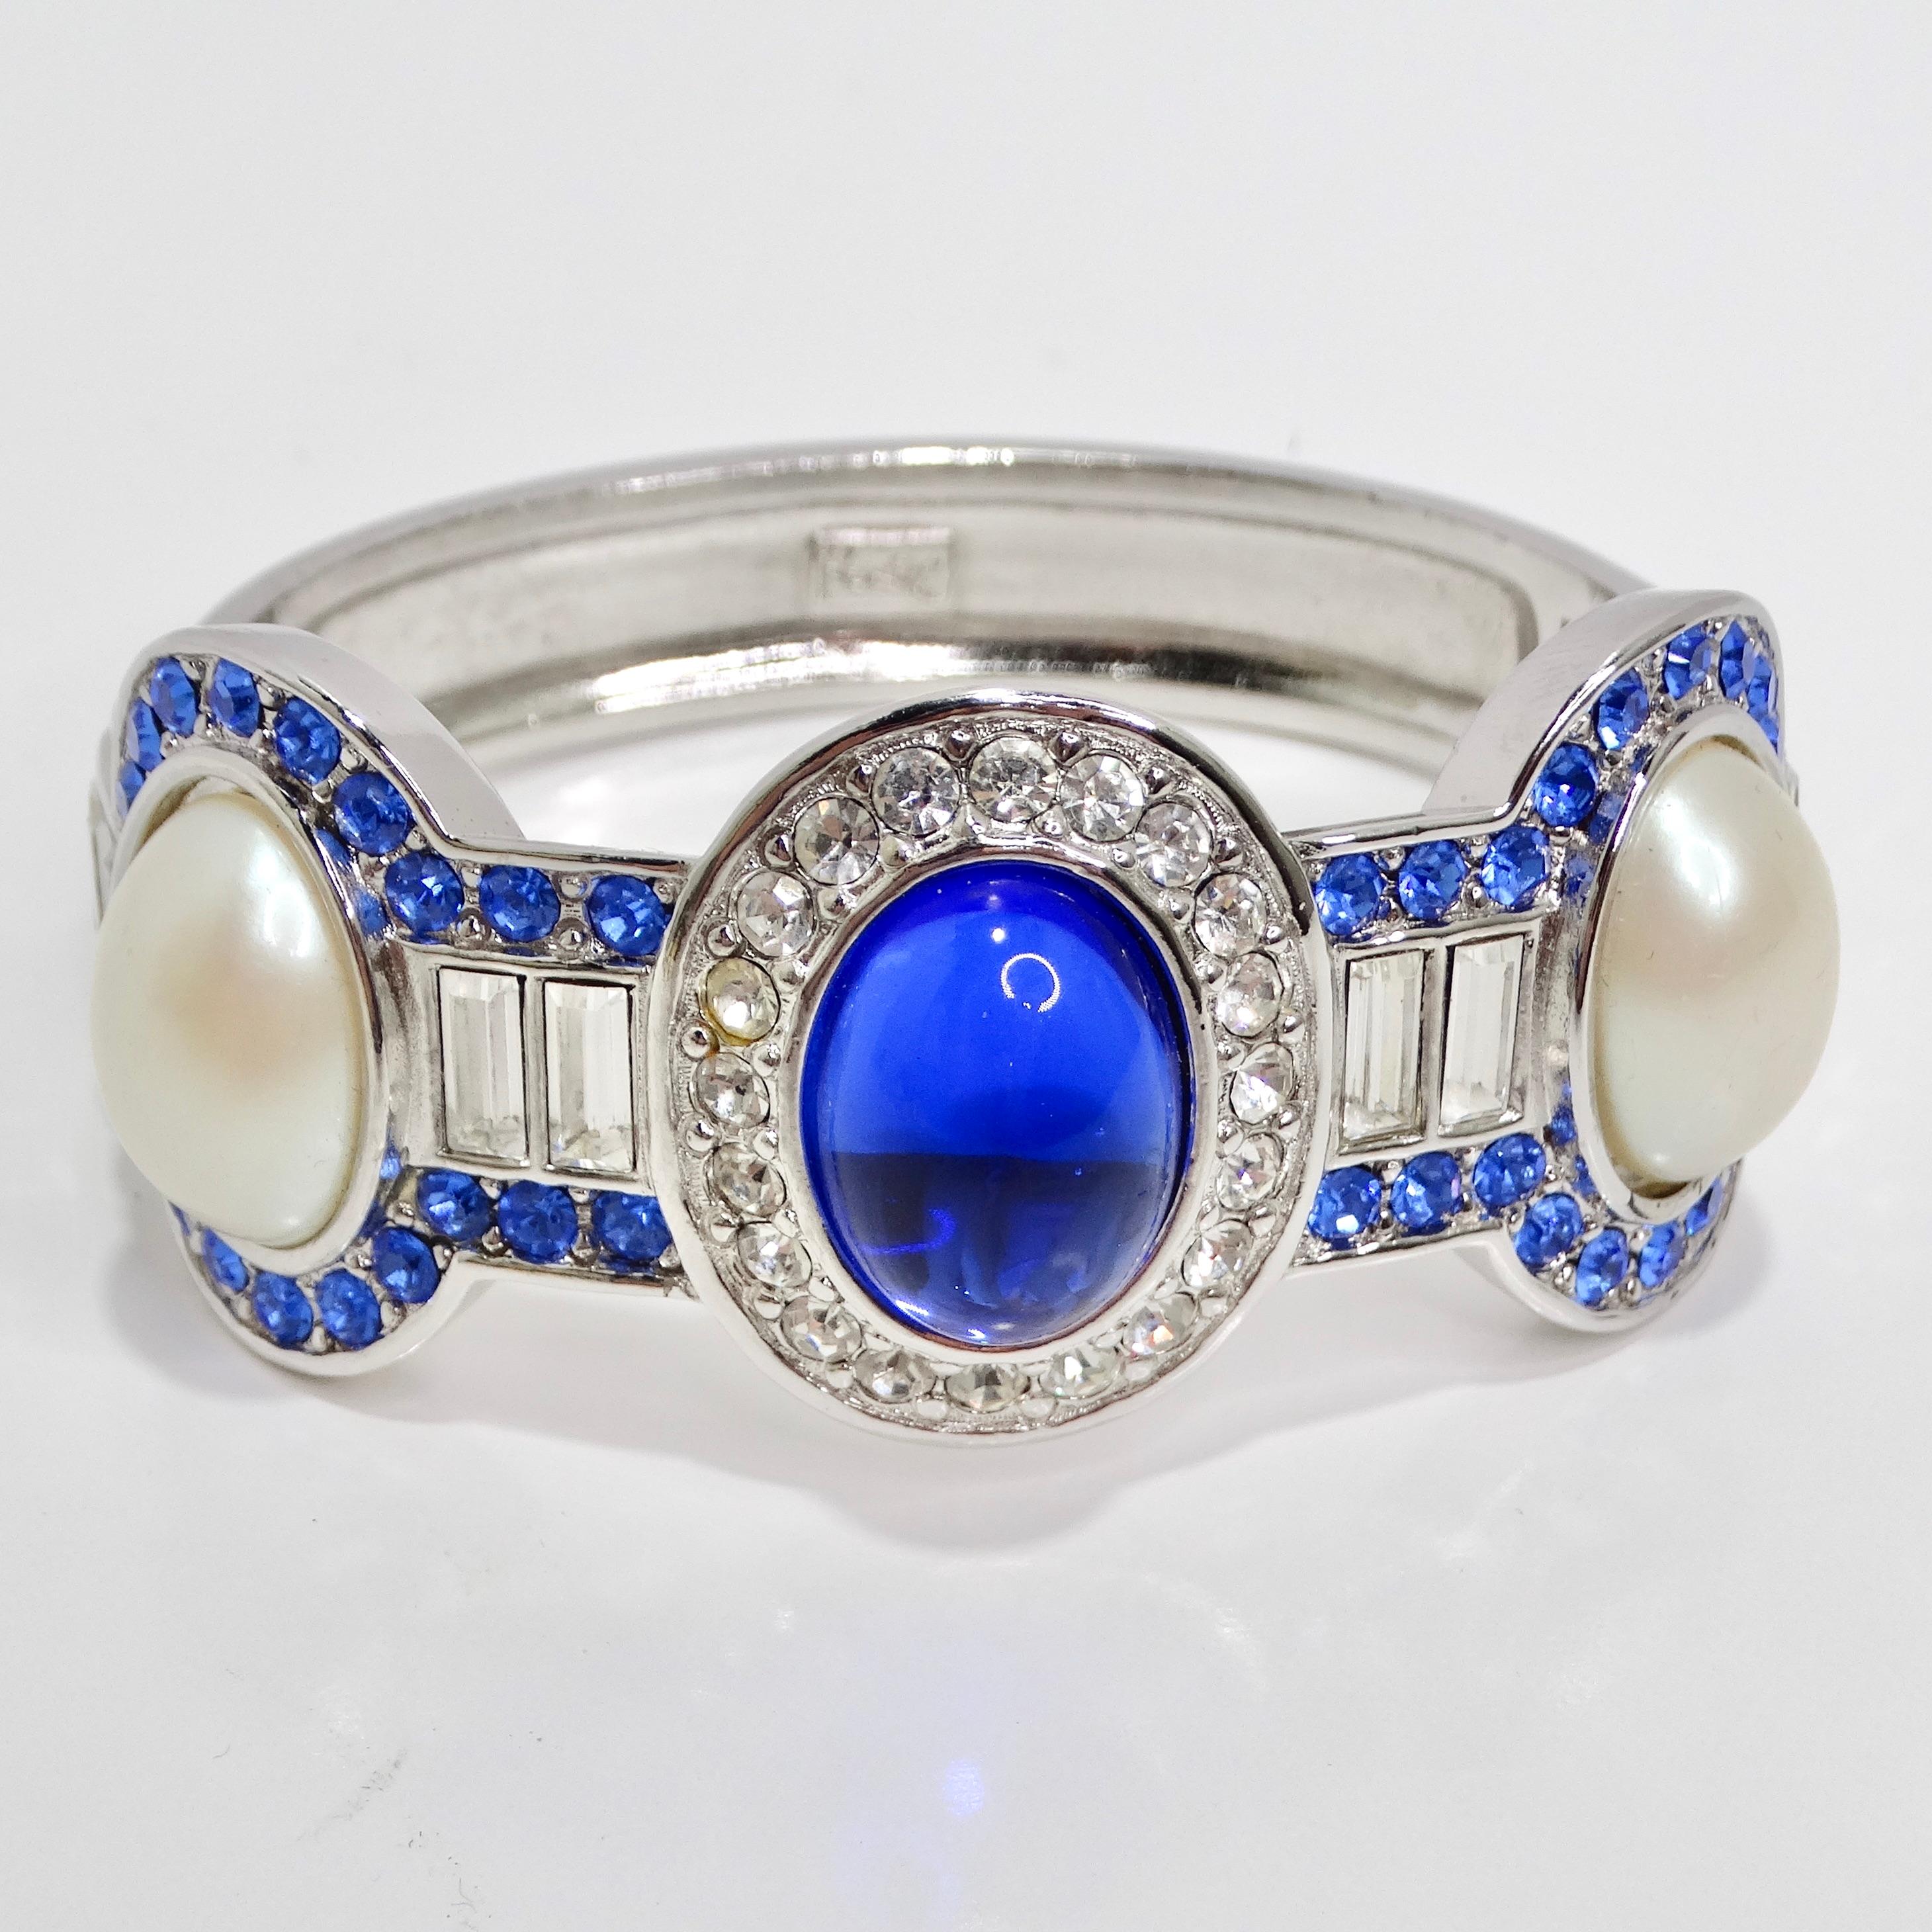 Introducing the Yves Saint Laurent 1990s Faux Sapphire Pearl Clamper Bracelet, a glamorous and captivating accessory that perfectly captures the essence of the fashionable era. This silver-tone clamper bracelet boasts a sophisticated design with